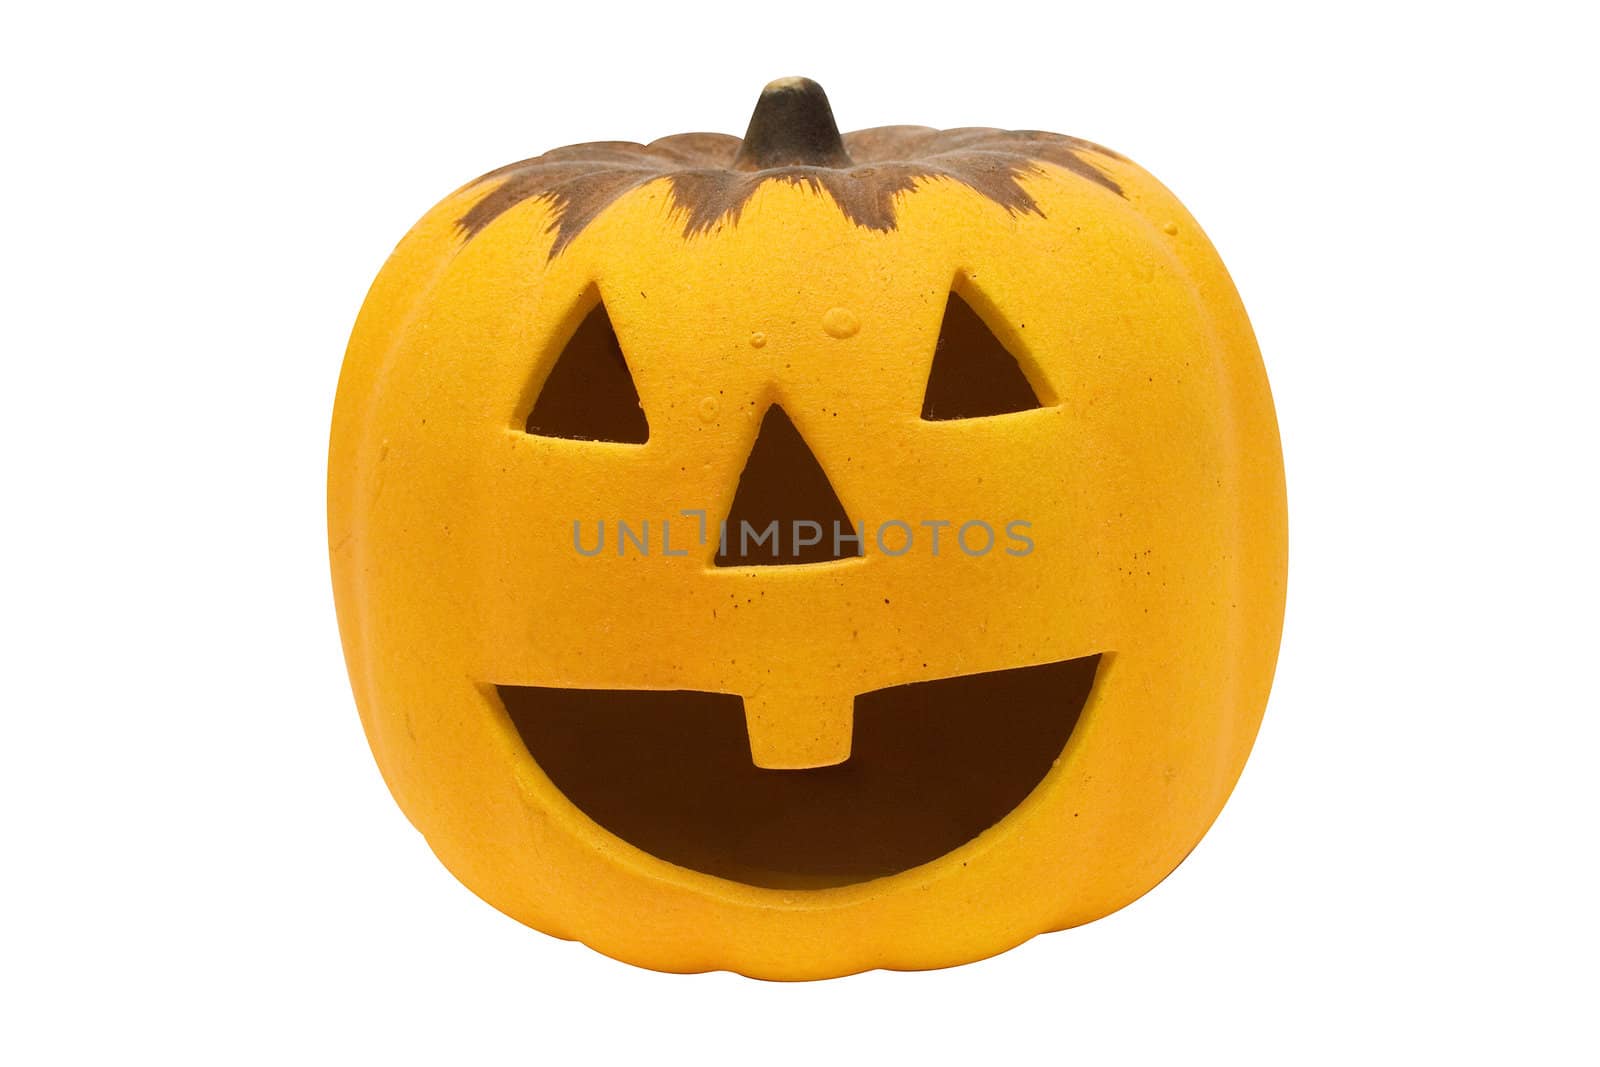 Laughing Pumpkin with Clipping Path by winterling